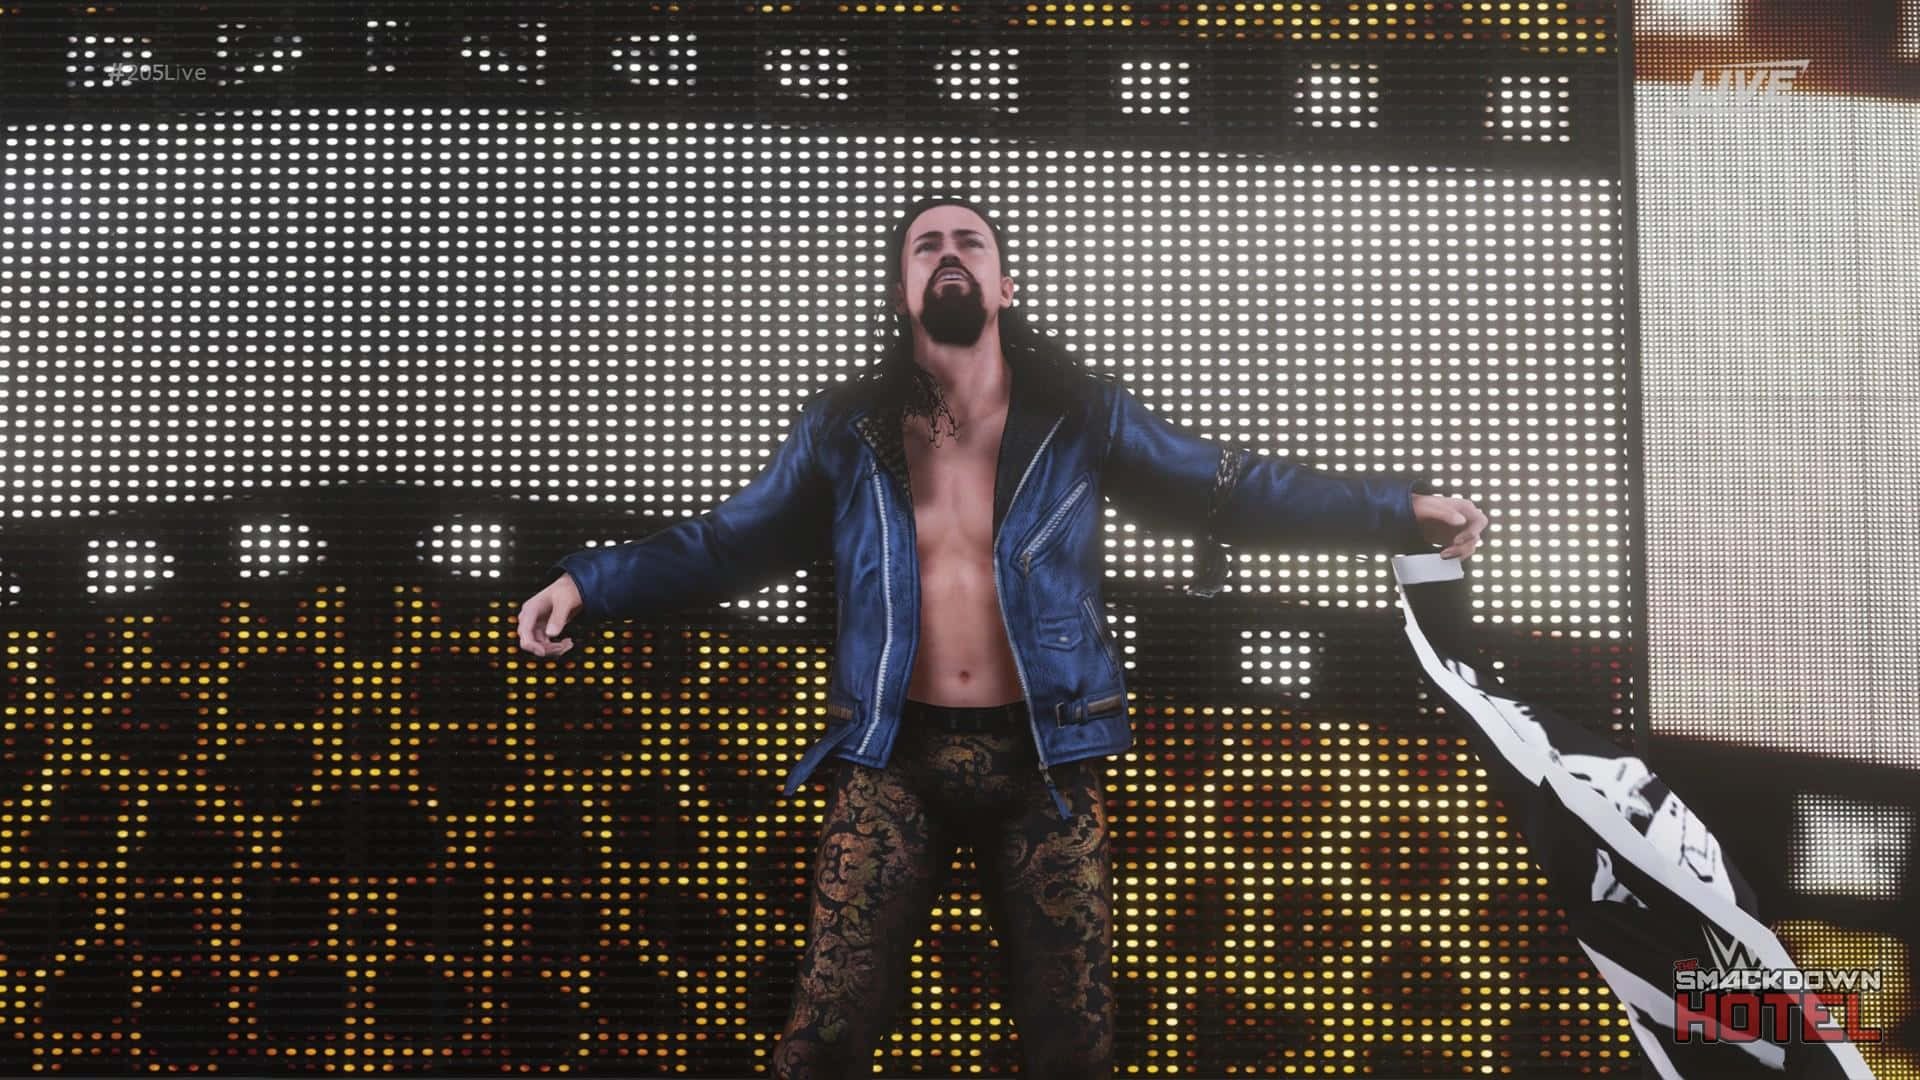 Brian Kendrick Stage Entrance Wallpaper